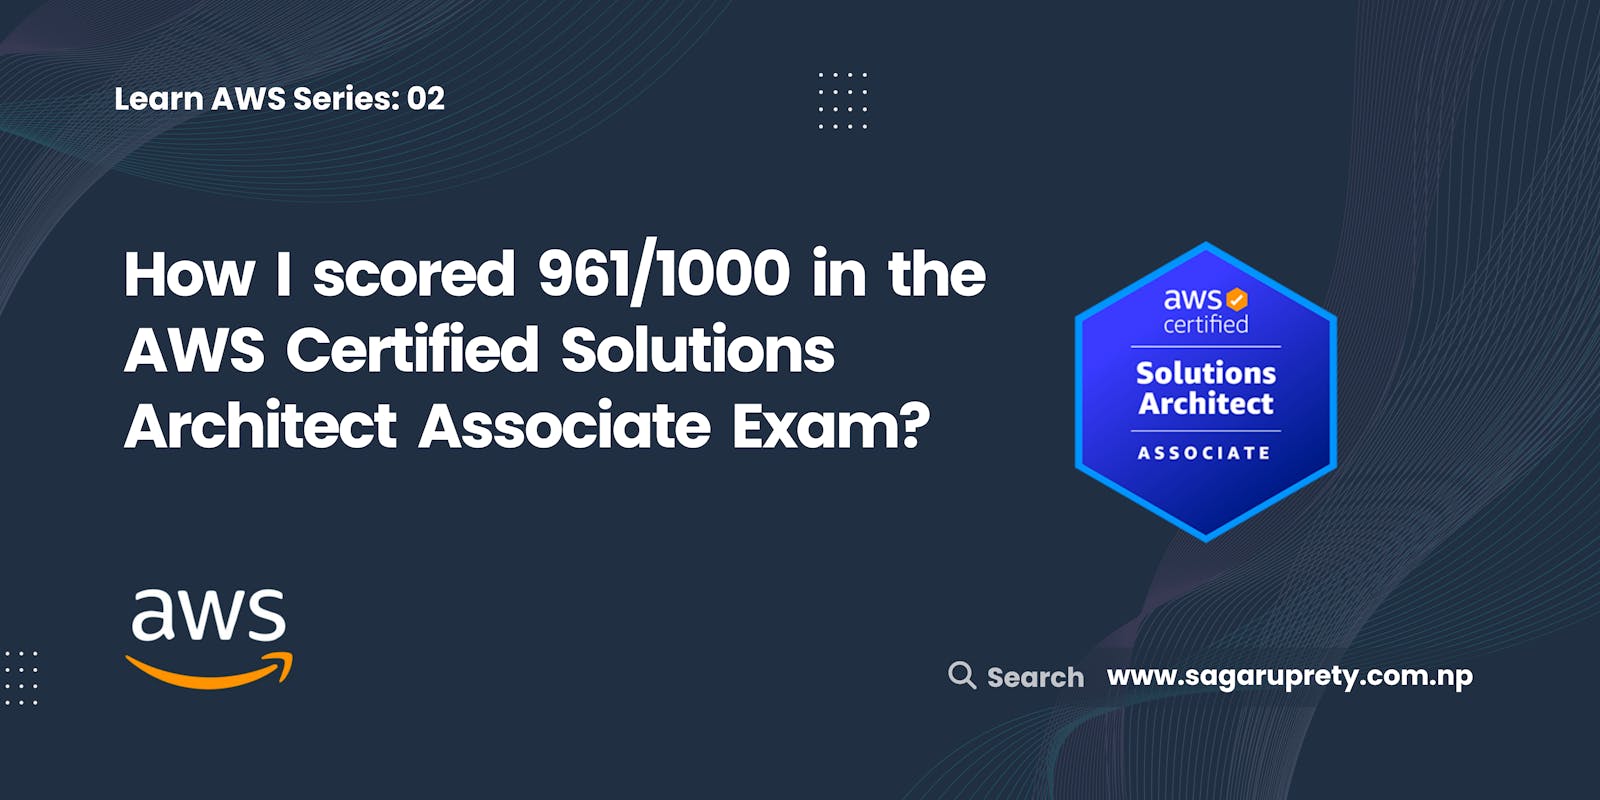 Scoring 961 out of 1000 on the AWS Certified Solutions Architect Associate Exam: My Experience